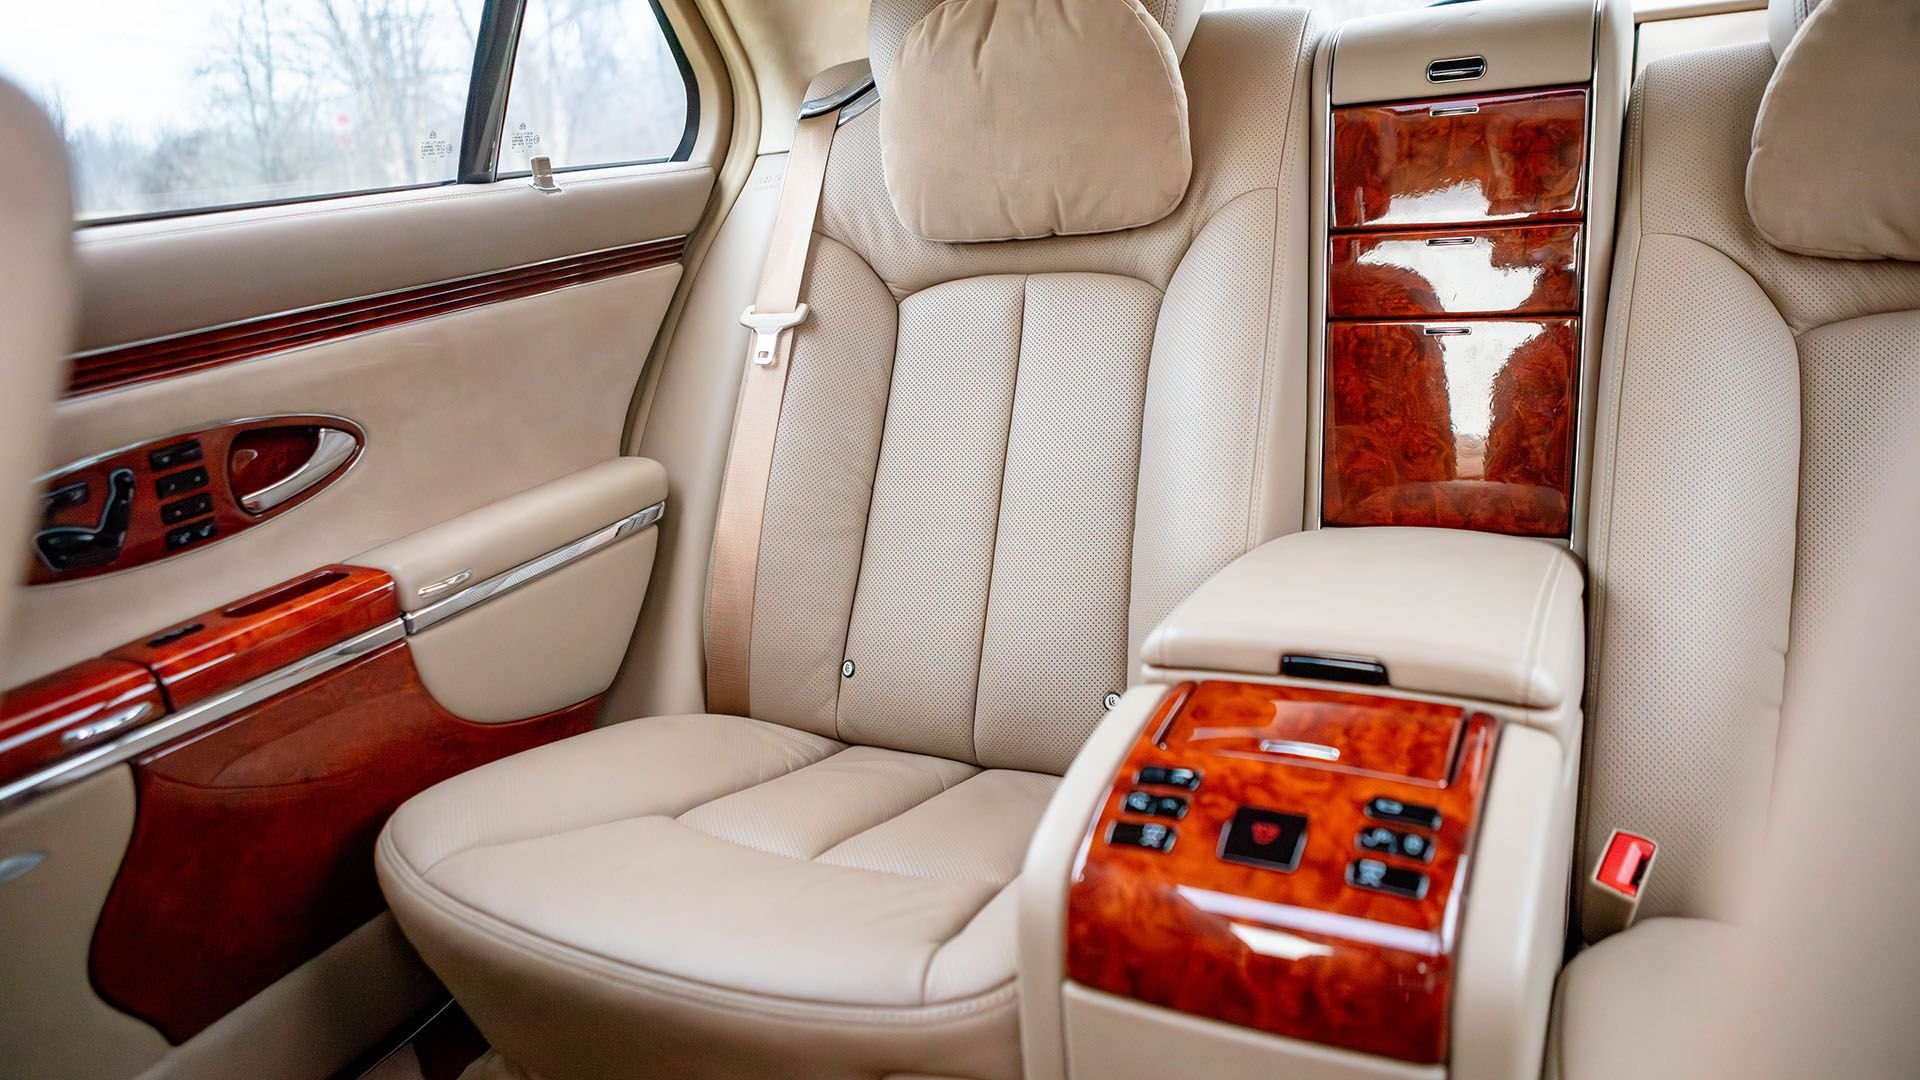 For Sale 2004 Maybach 57